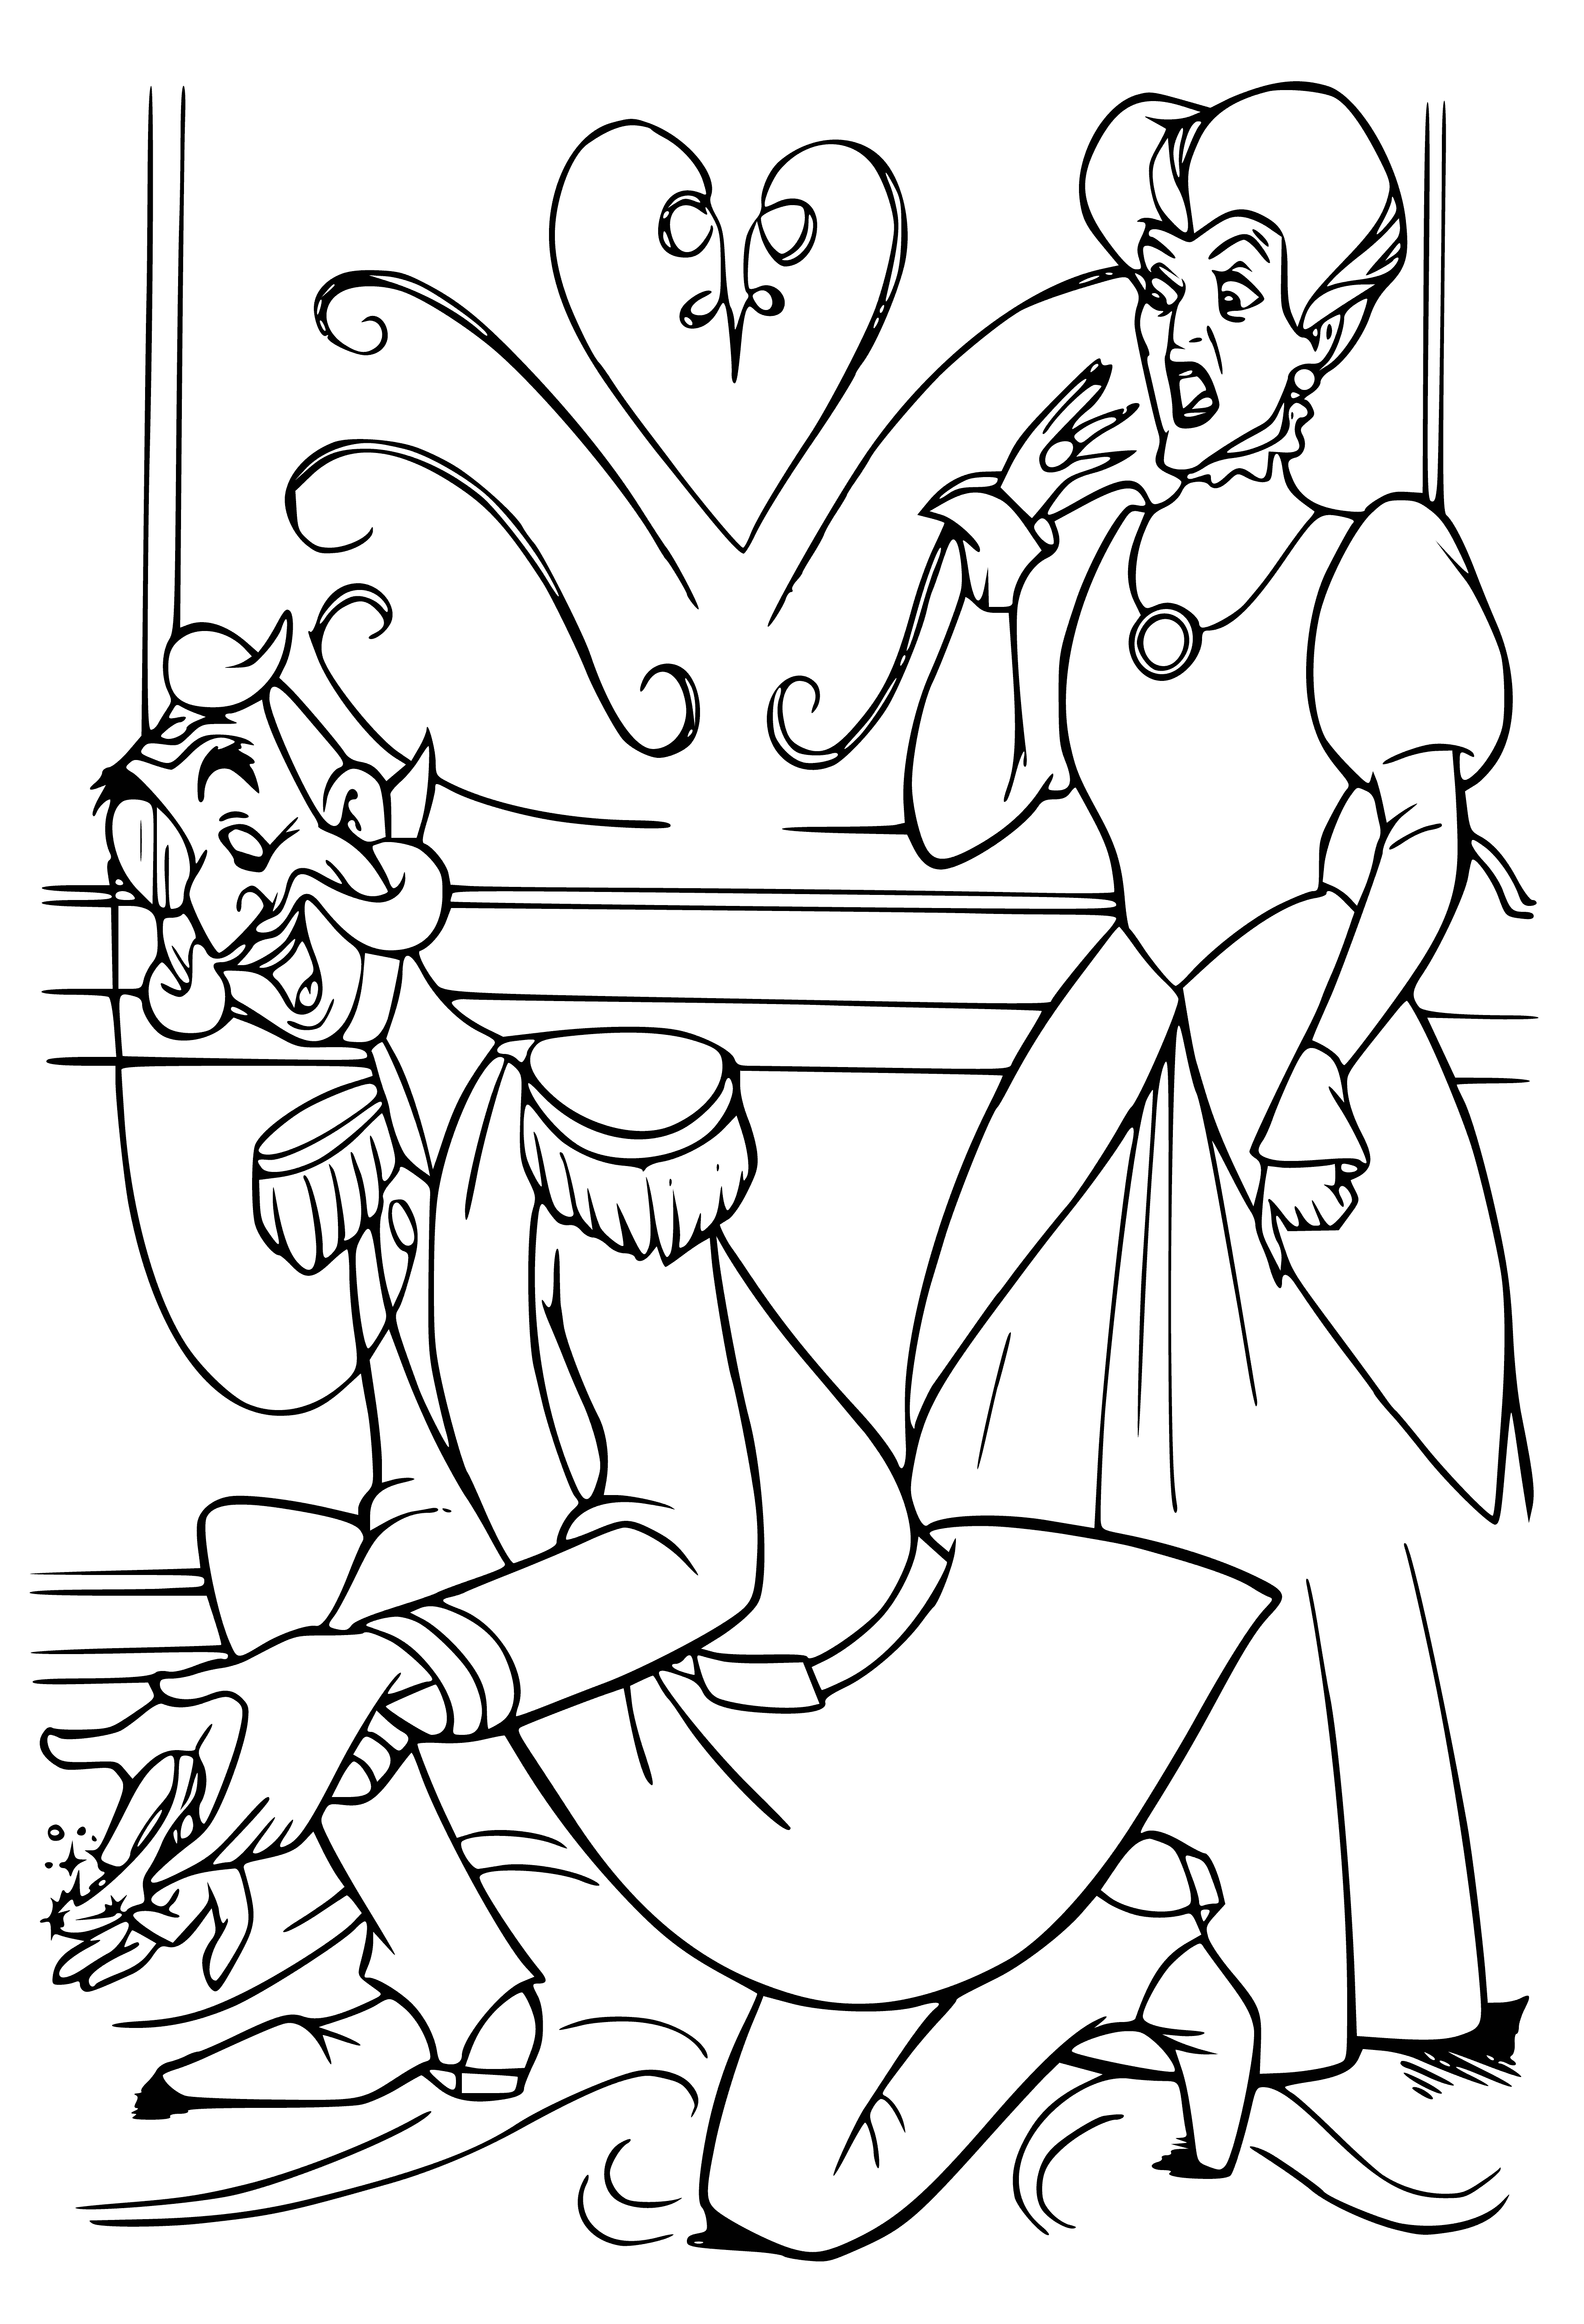 coloring page: Small, delicate glass slipper with slight heel, rounded toe, gold band around ankle. #Cinderella